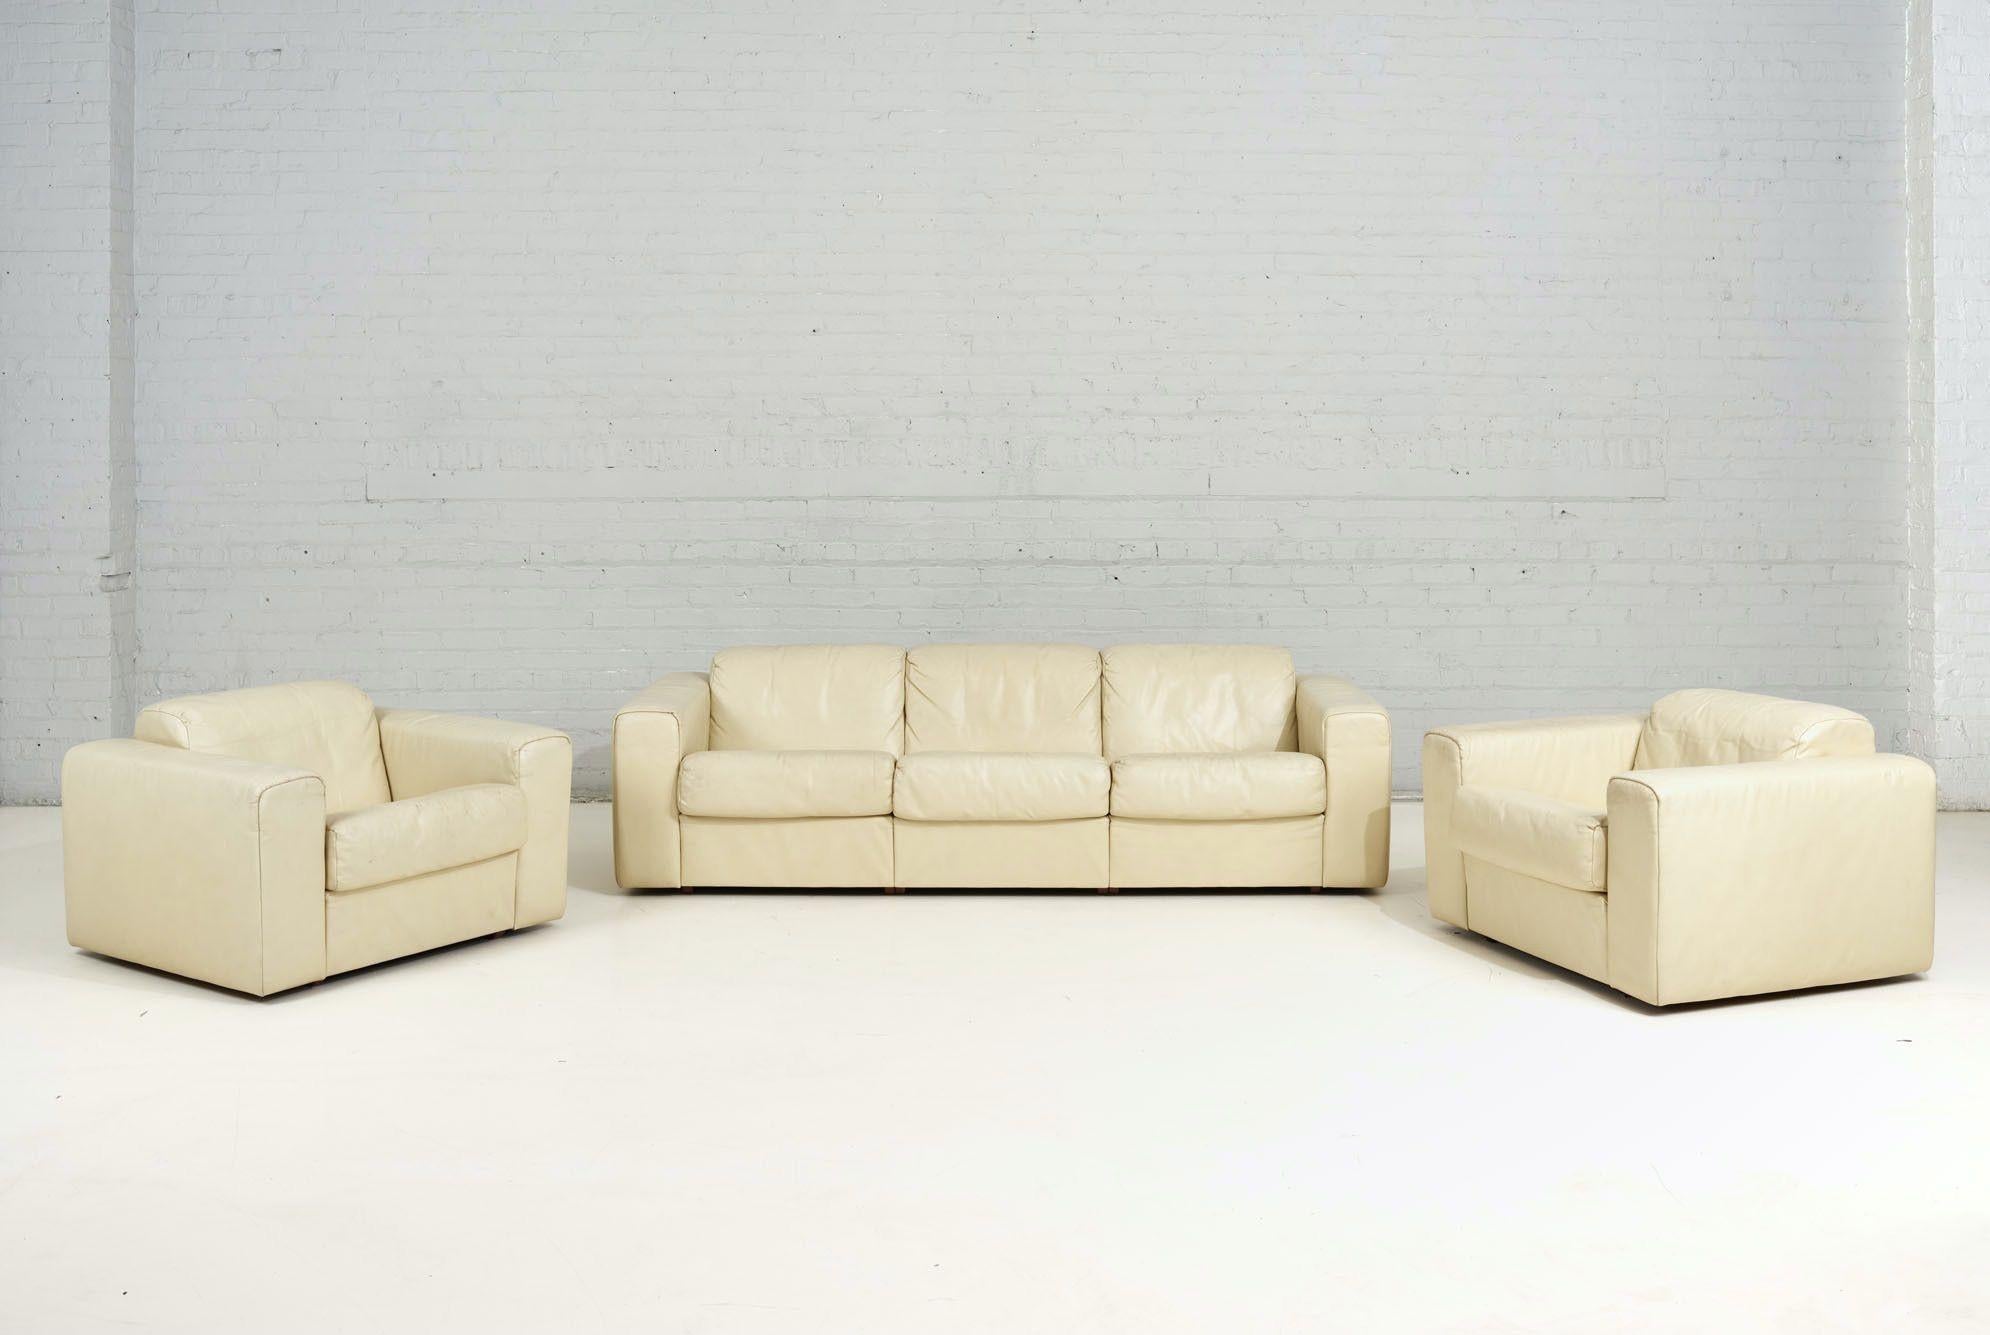 Baron Sofa by Robert Haussmann for Stendig, Cream Leather, 1970 For Sale 10